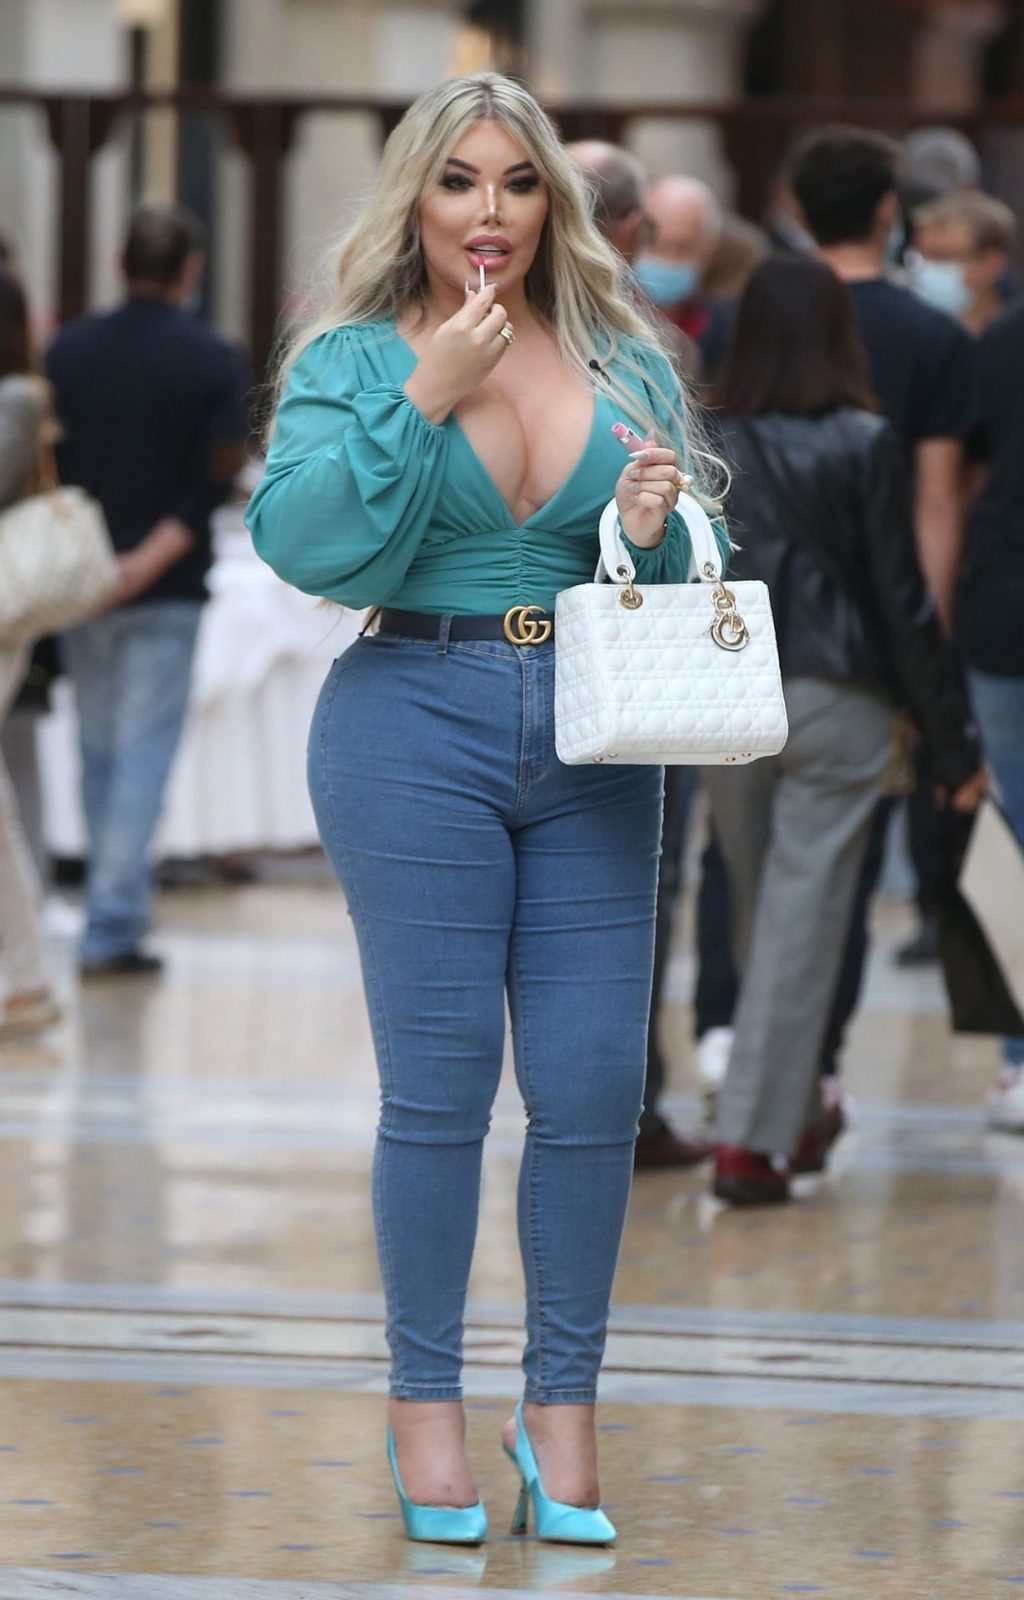 Jessica Alves is Seen Shopping in Piazza Duomo (38 Photos)